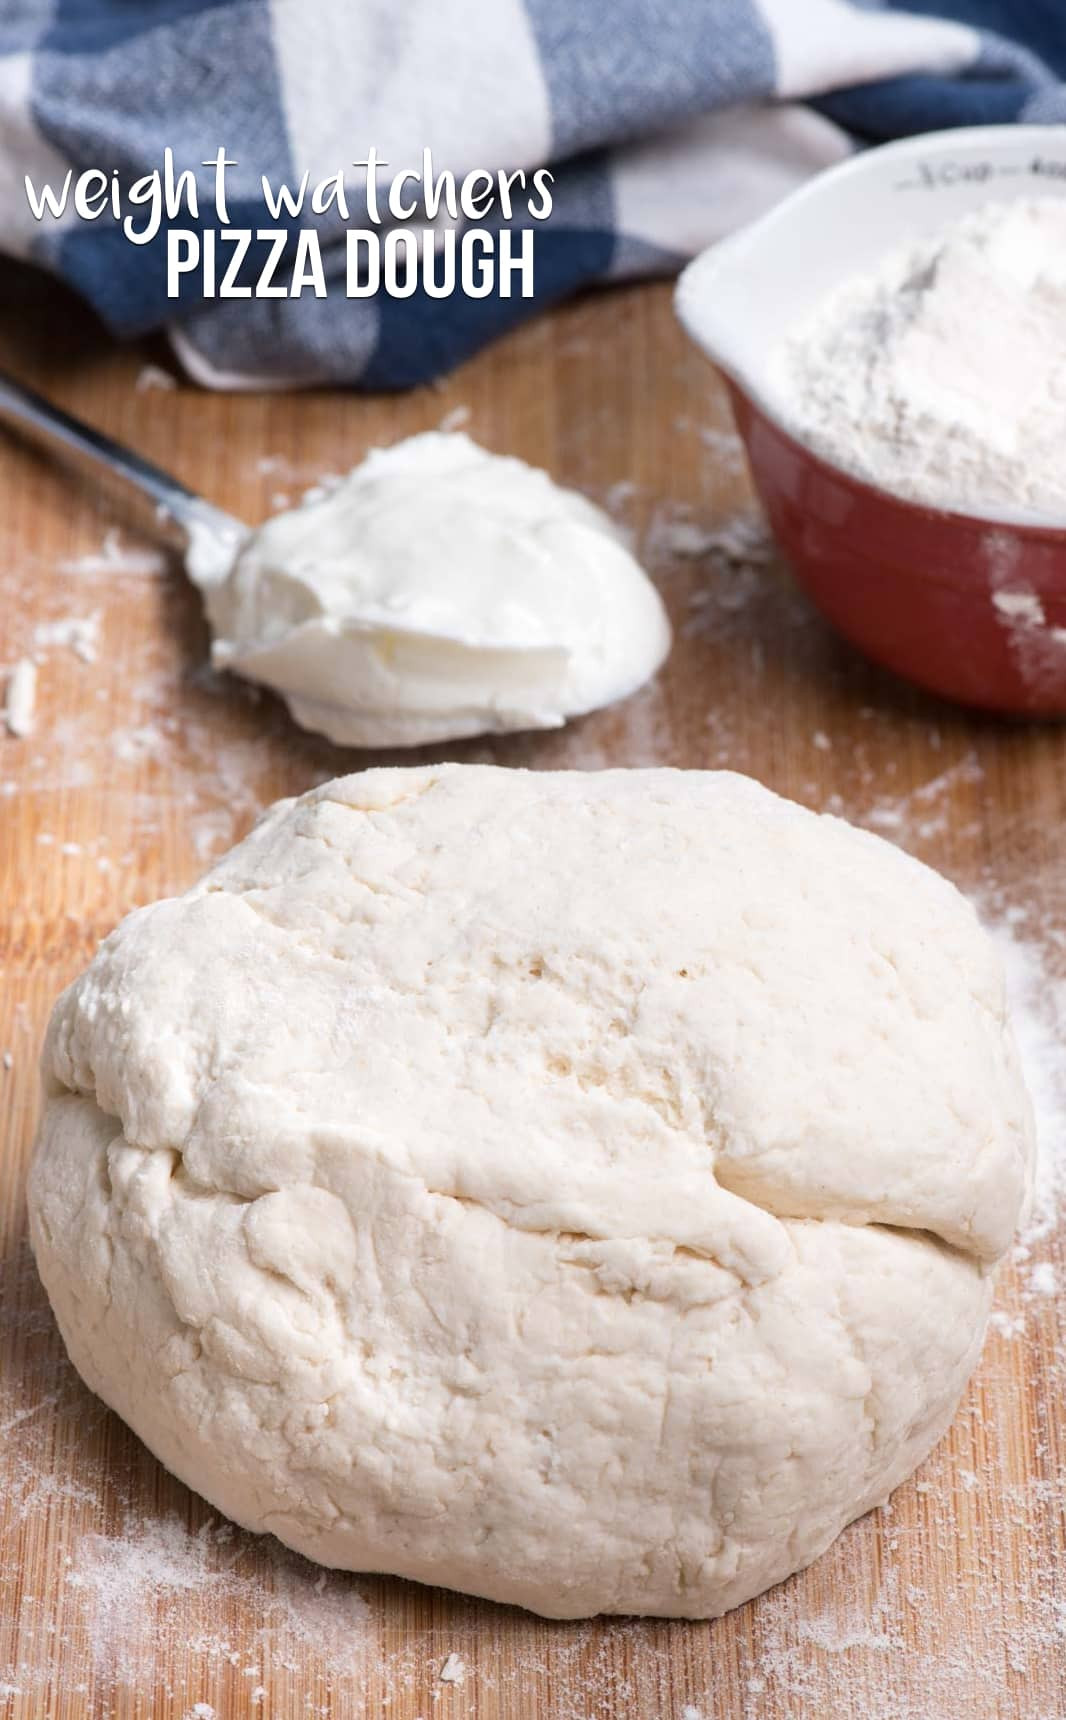 Pizza Dough Recipe By Weight
 Weight Watchers Pizza Dough Crazy for Crust